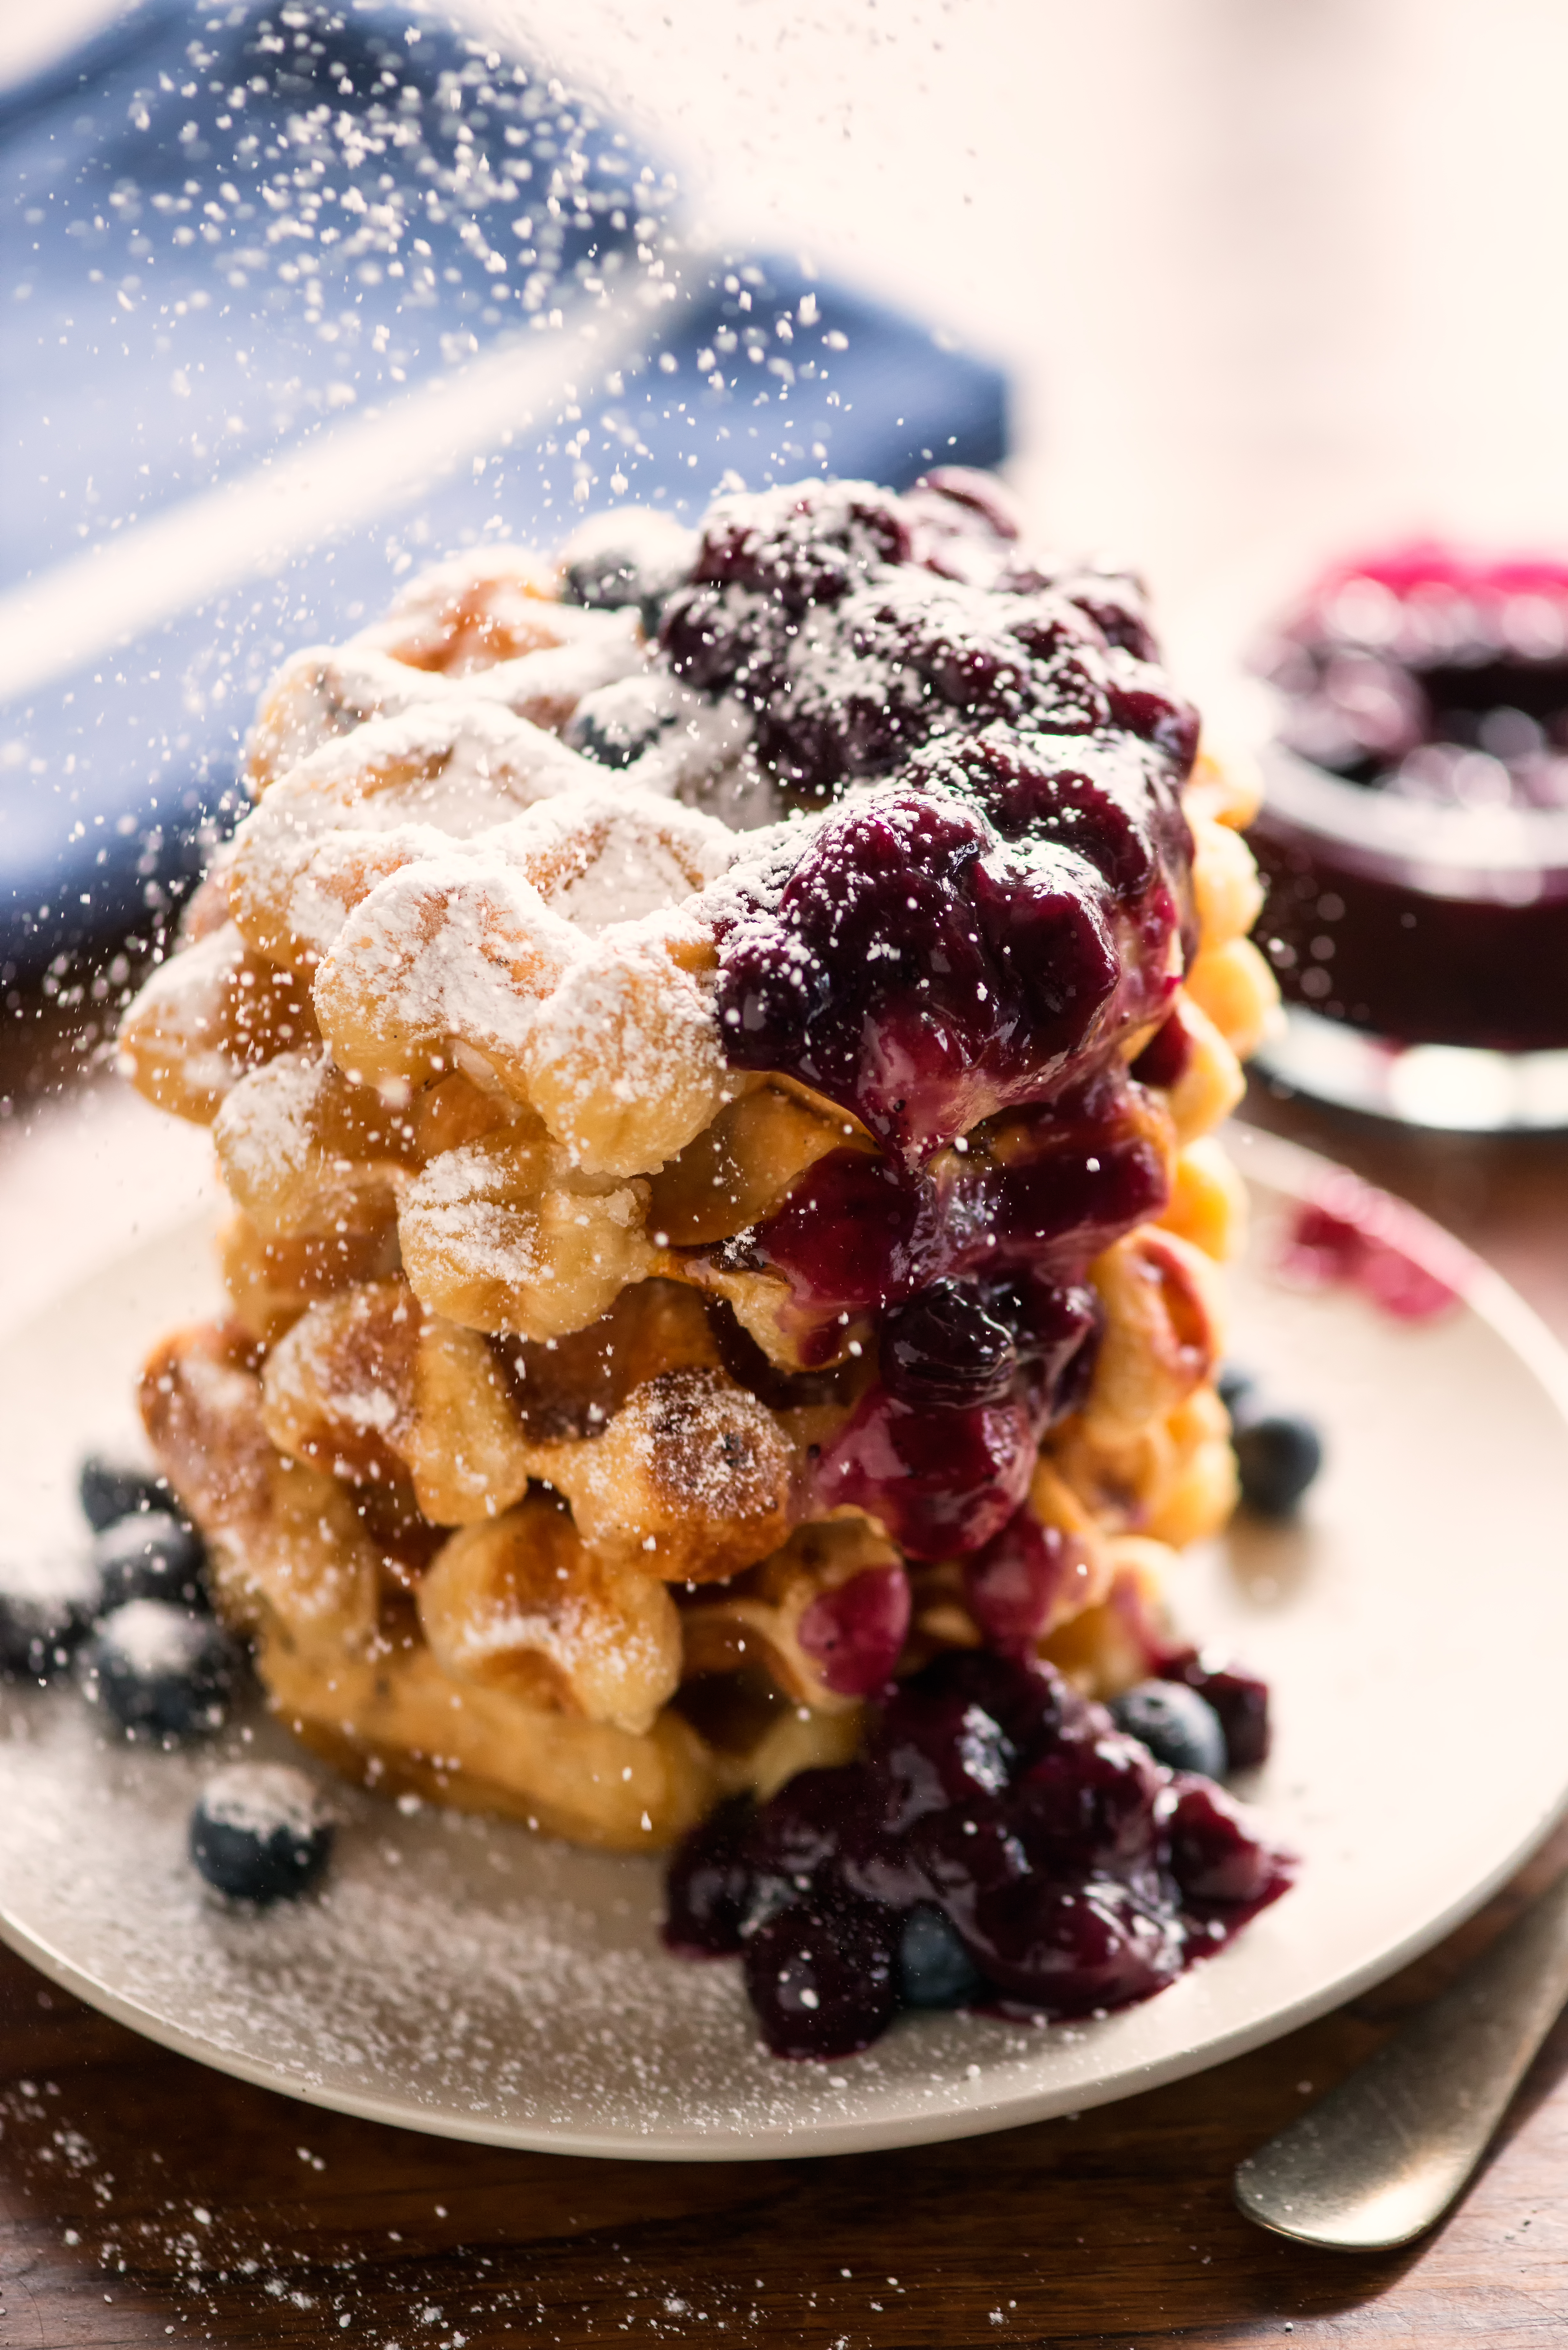 Spiced BC Blueberry Sauce with Dessert Waffles